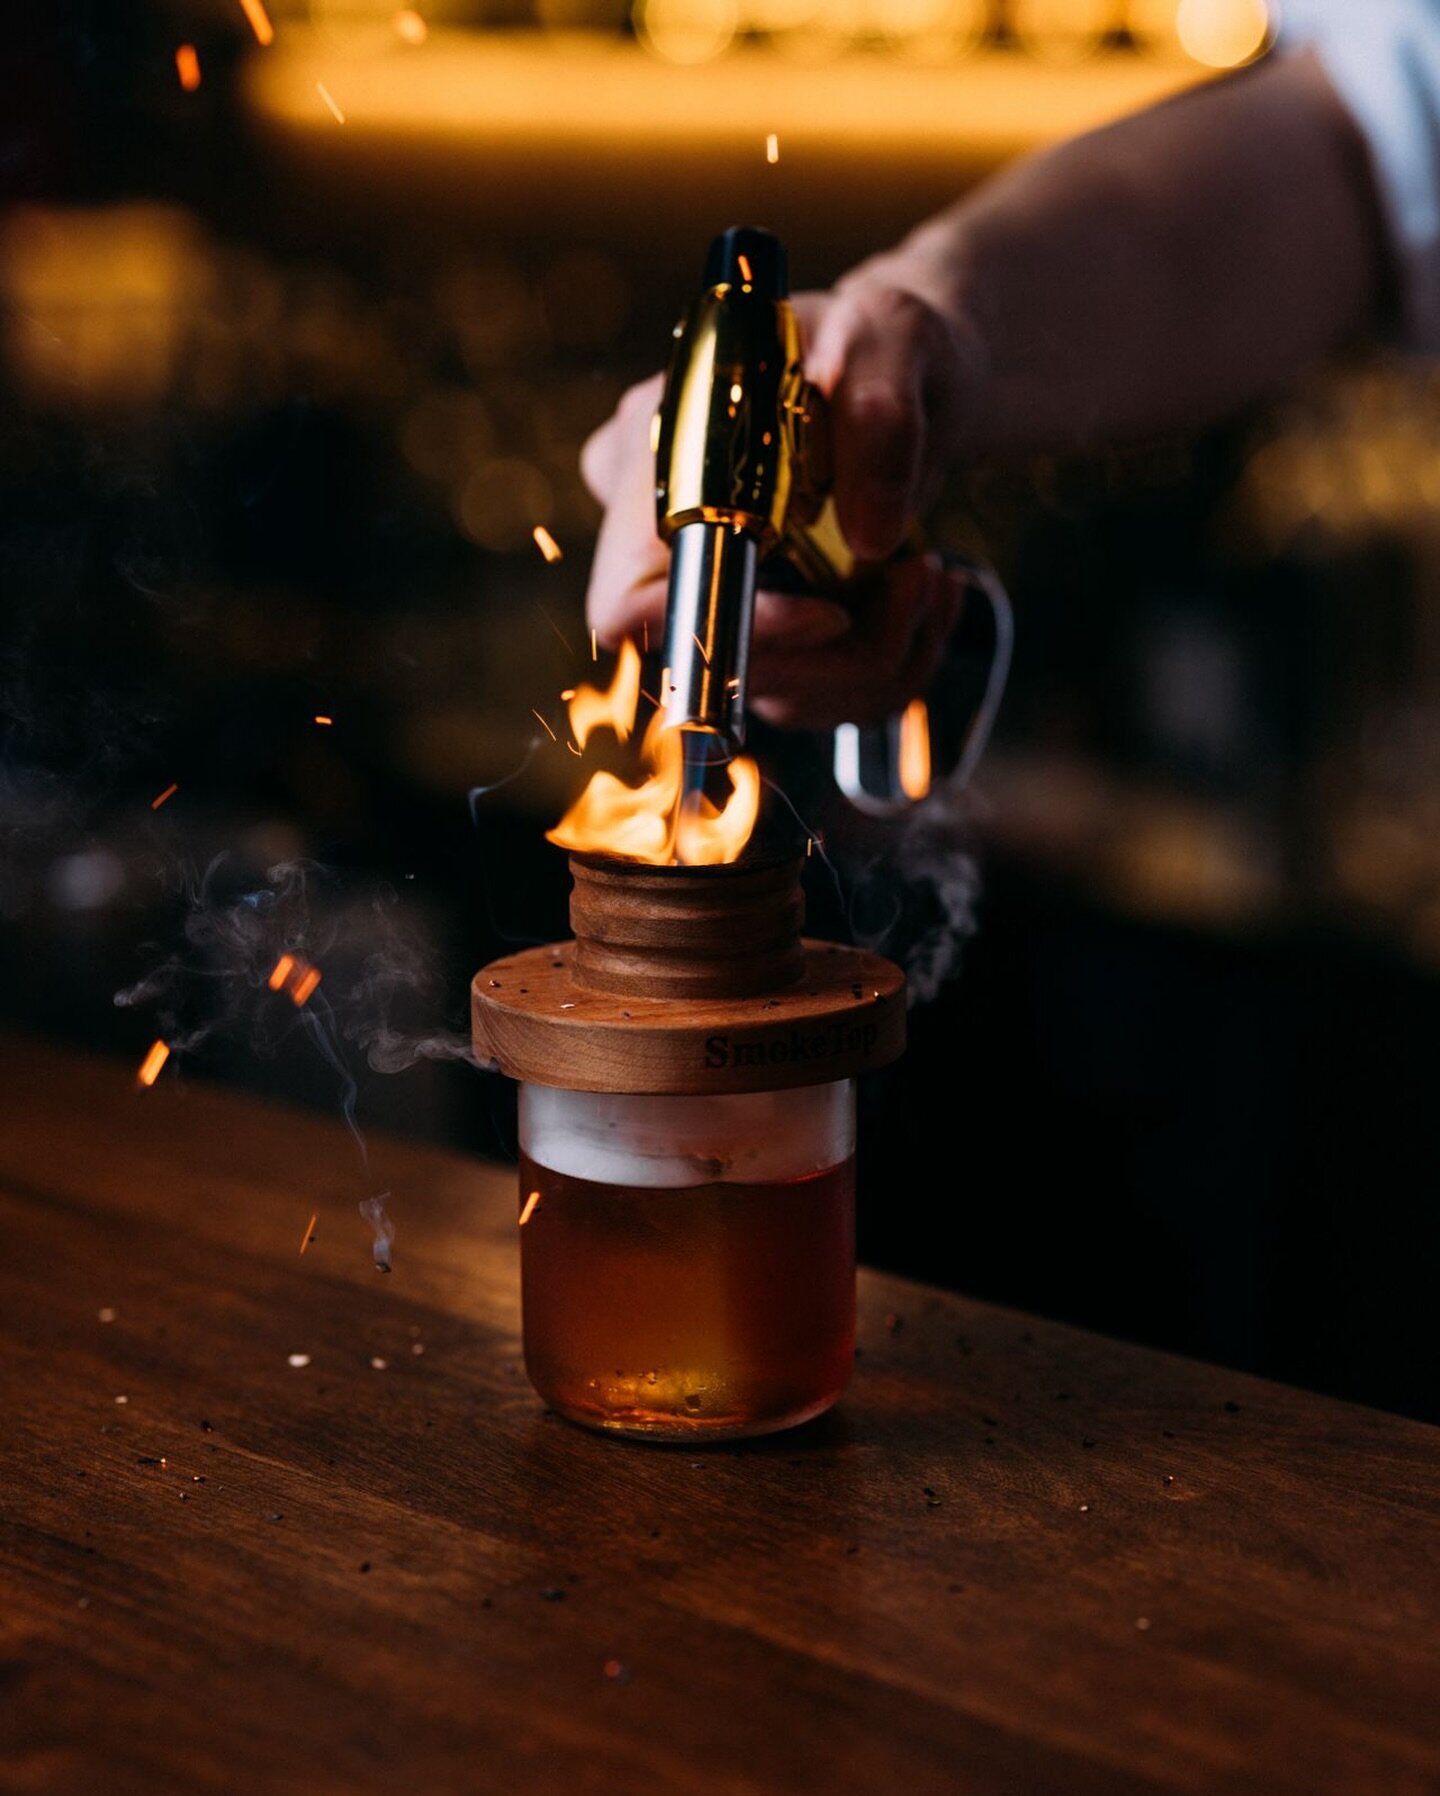 Smoked Apple Old Fashioned is an amazing pairing with our burgers and steaks! #smokedcocktails #cocktails